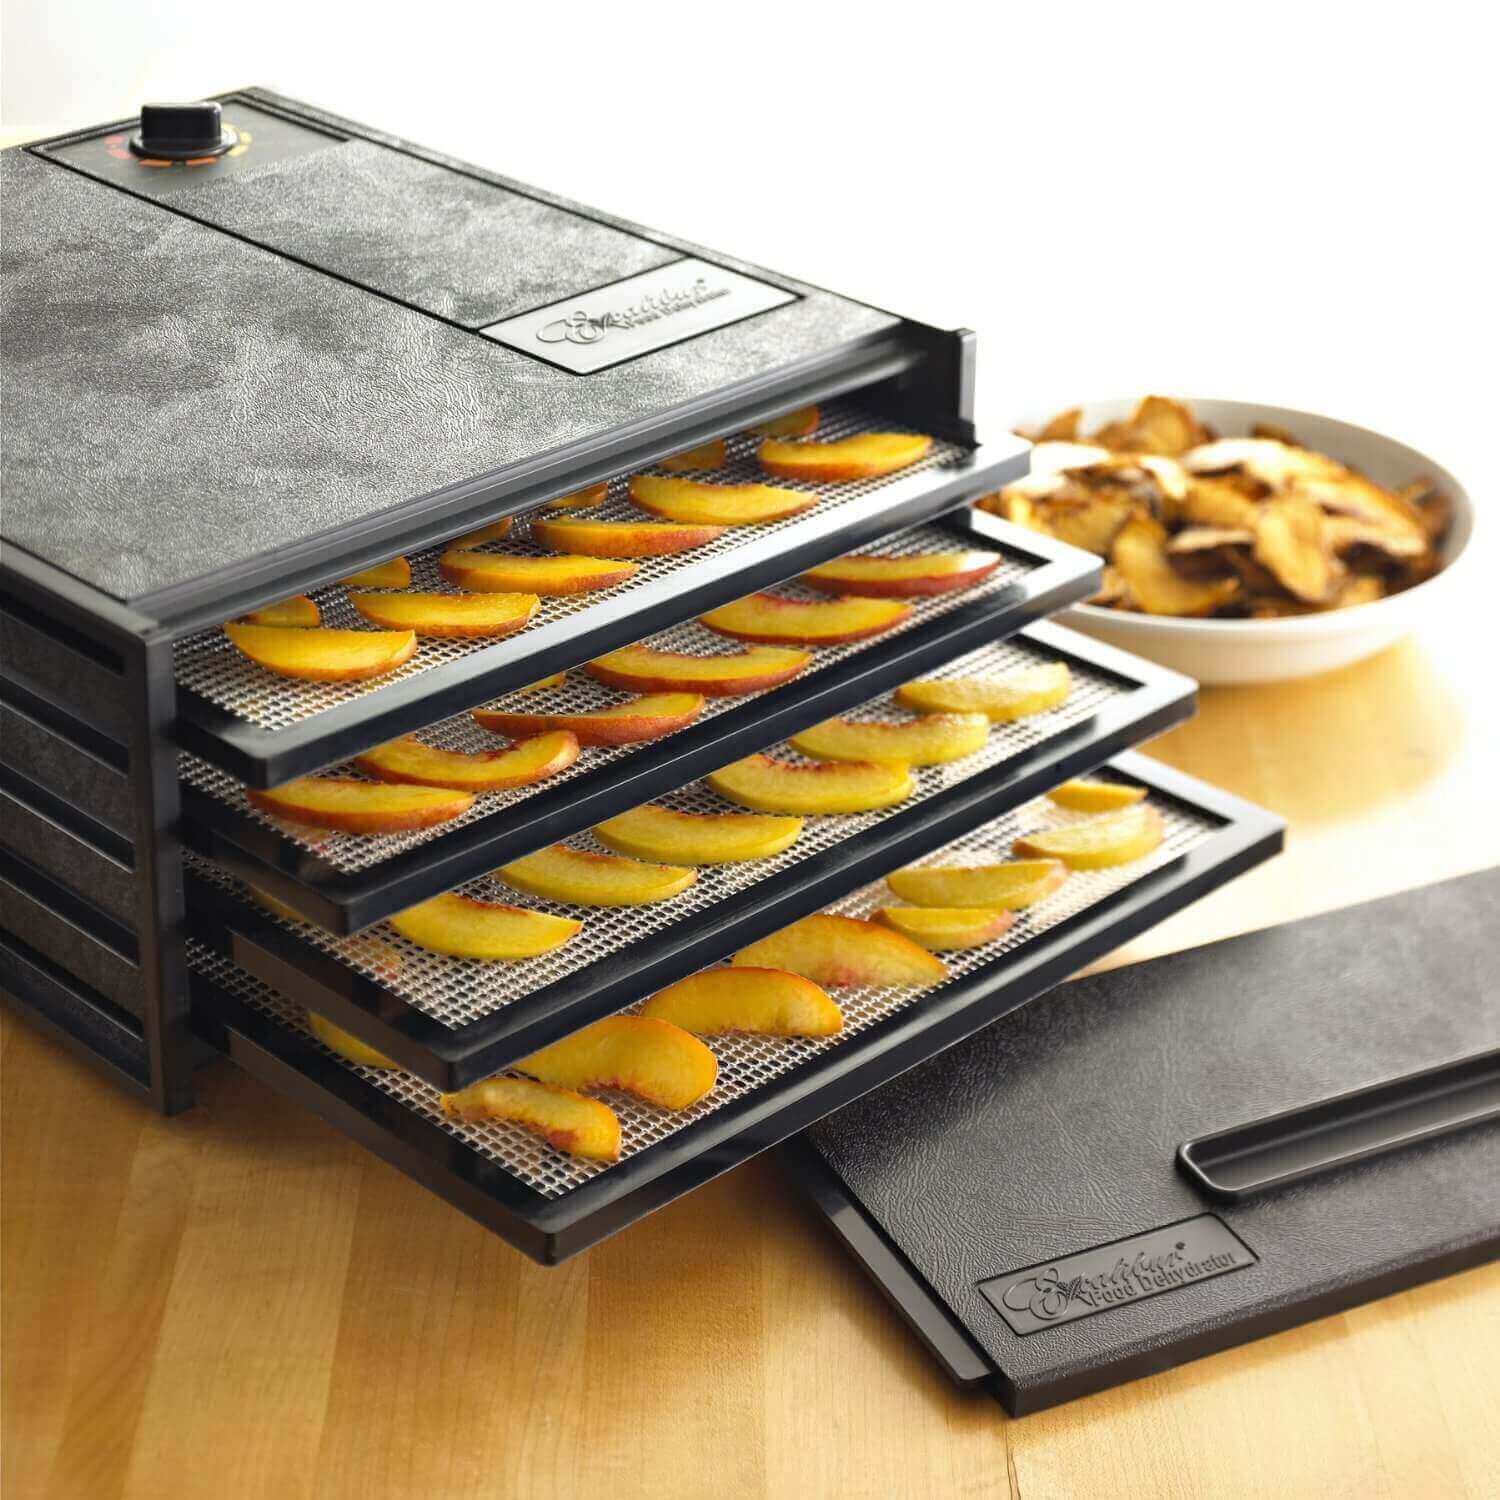 Excalibur 4400 4 tray dehydrator with fruit placed on the trays.